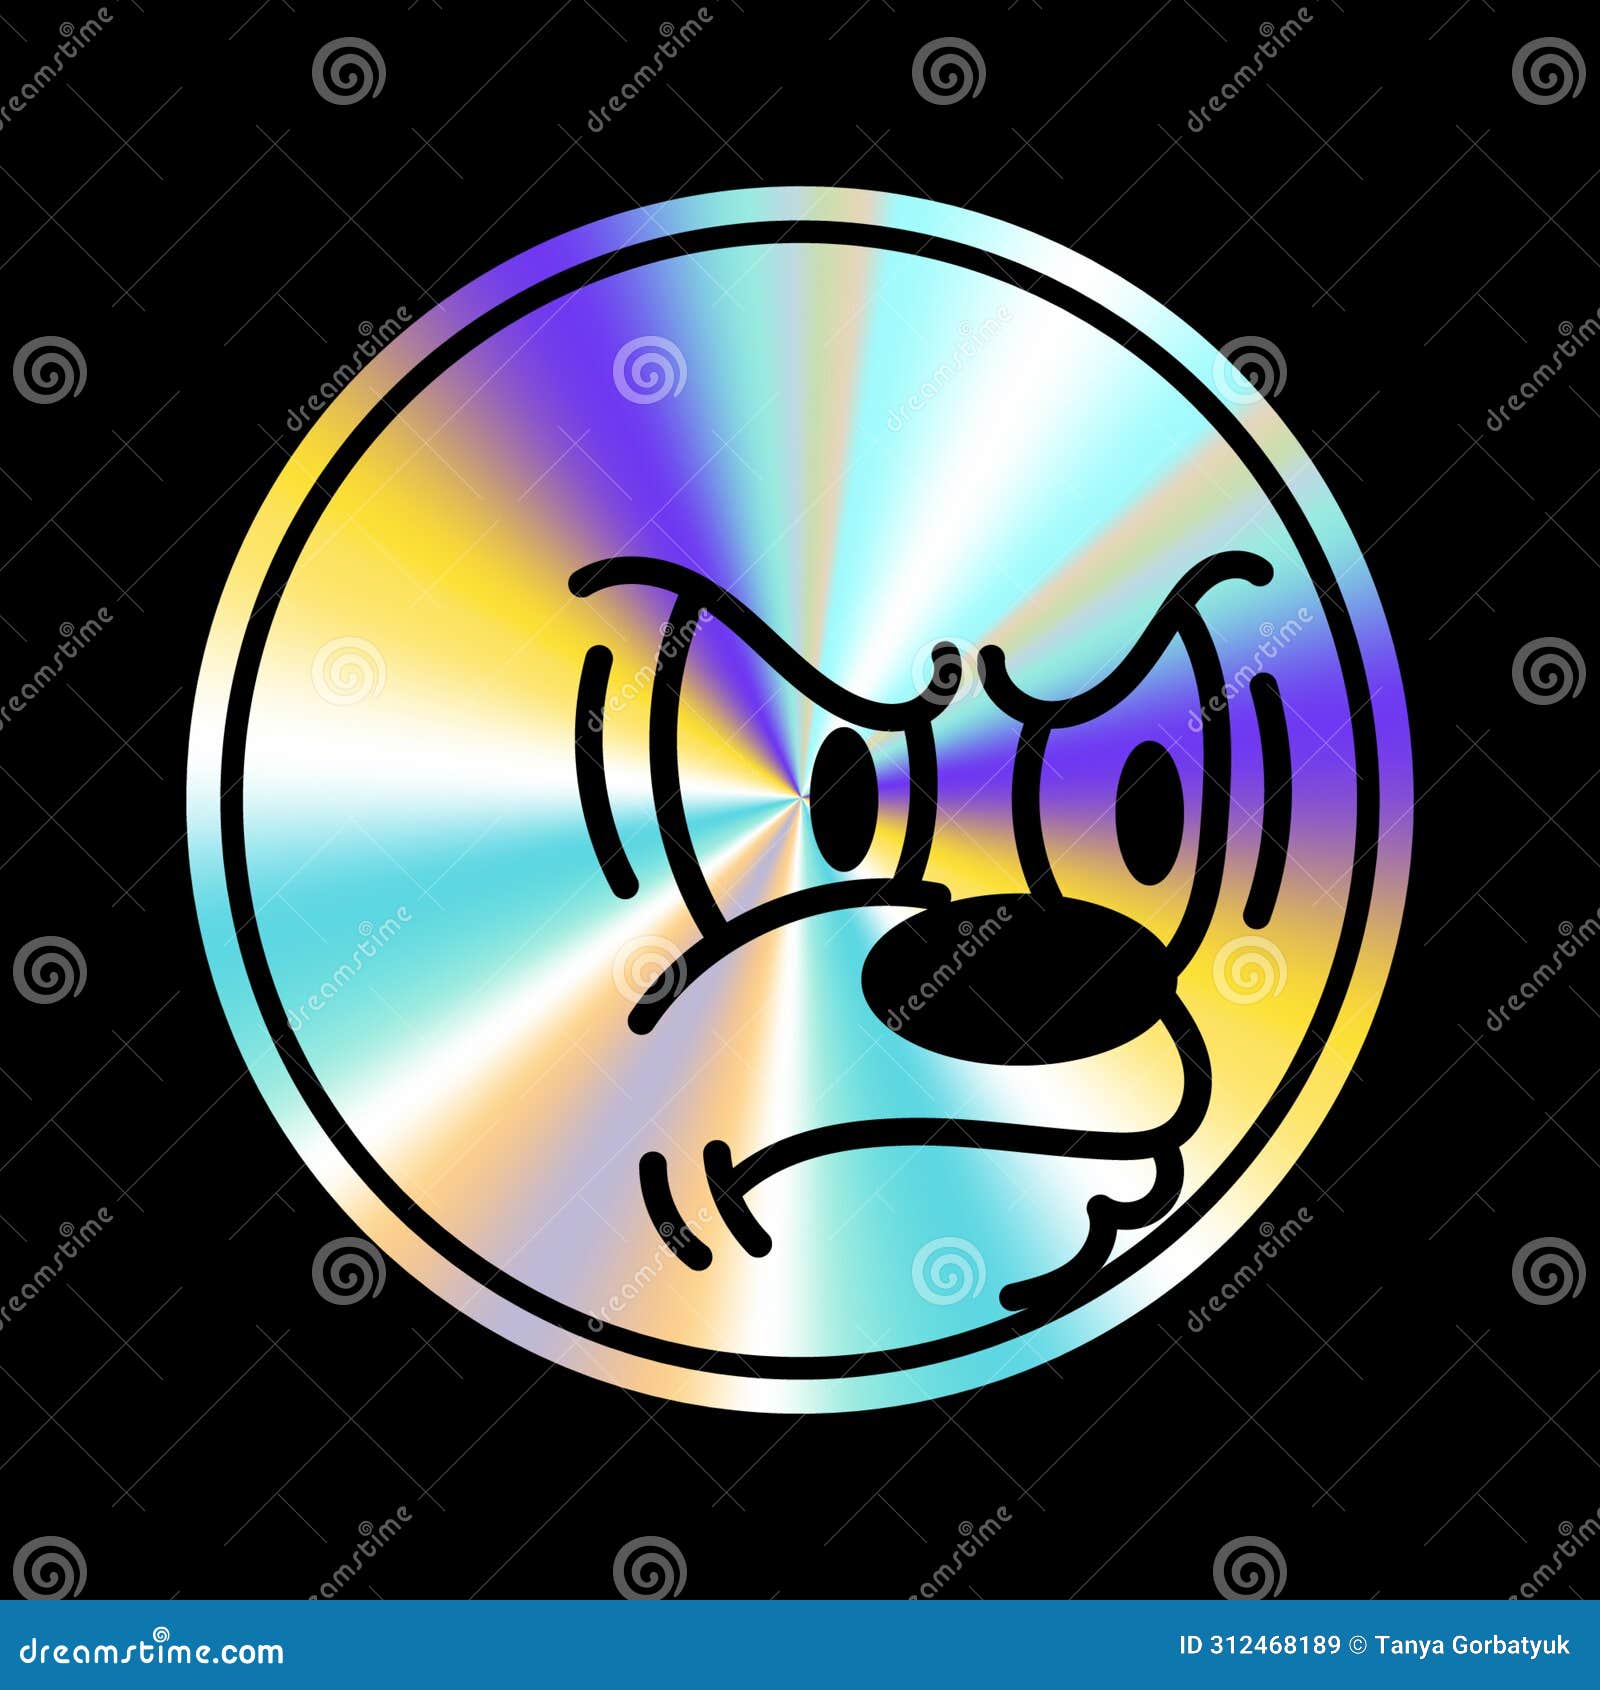 holographic sticker with cartoon face in a trendy retro y2k style.